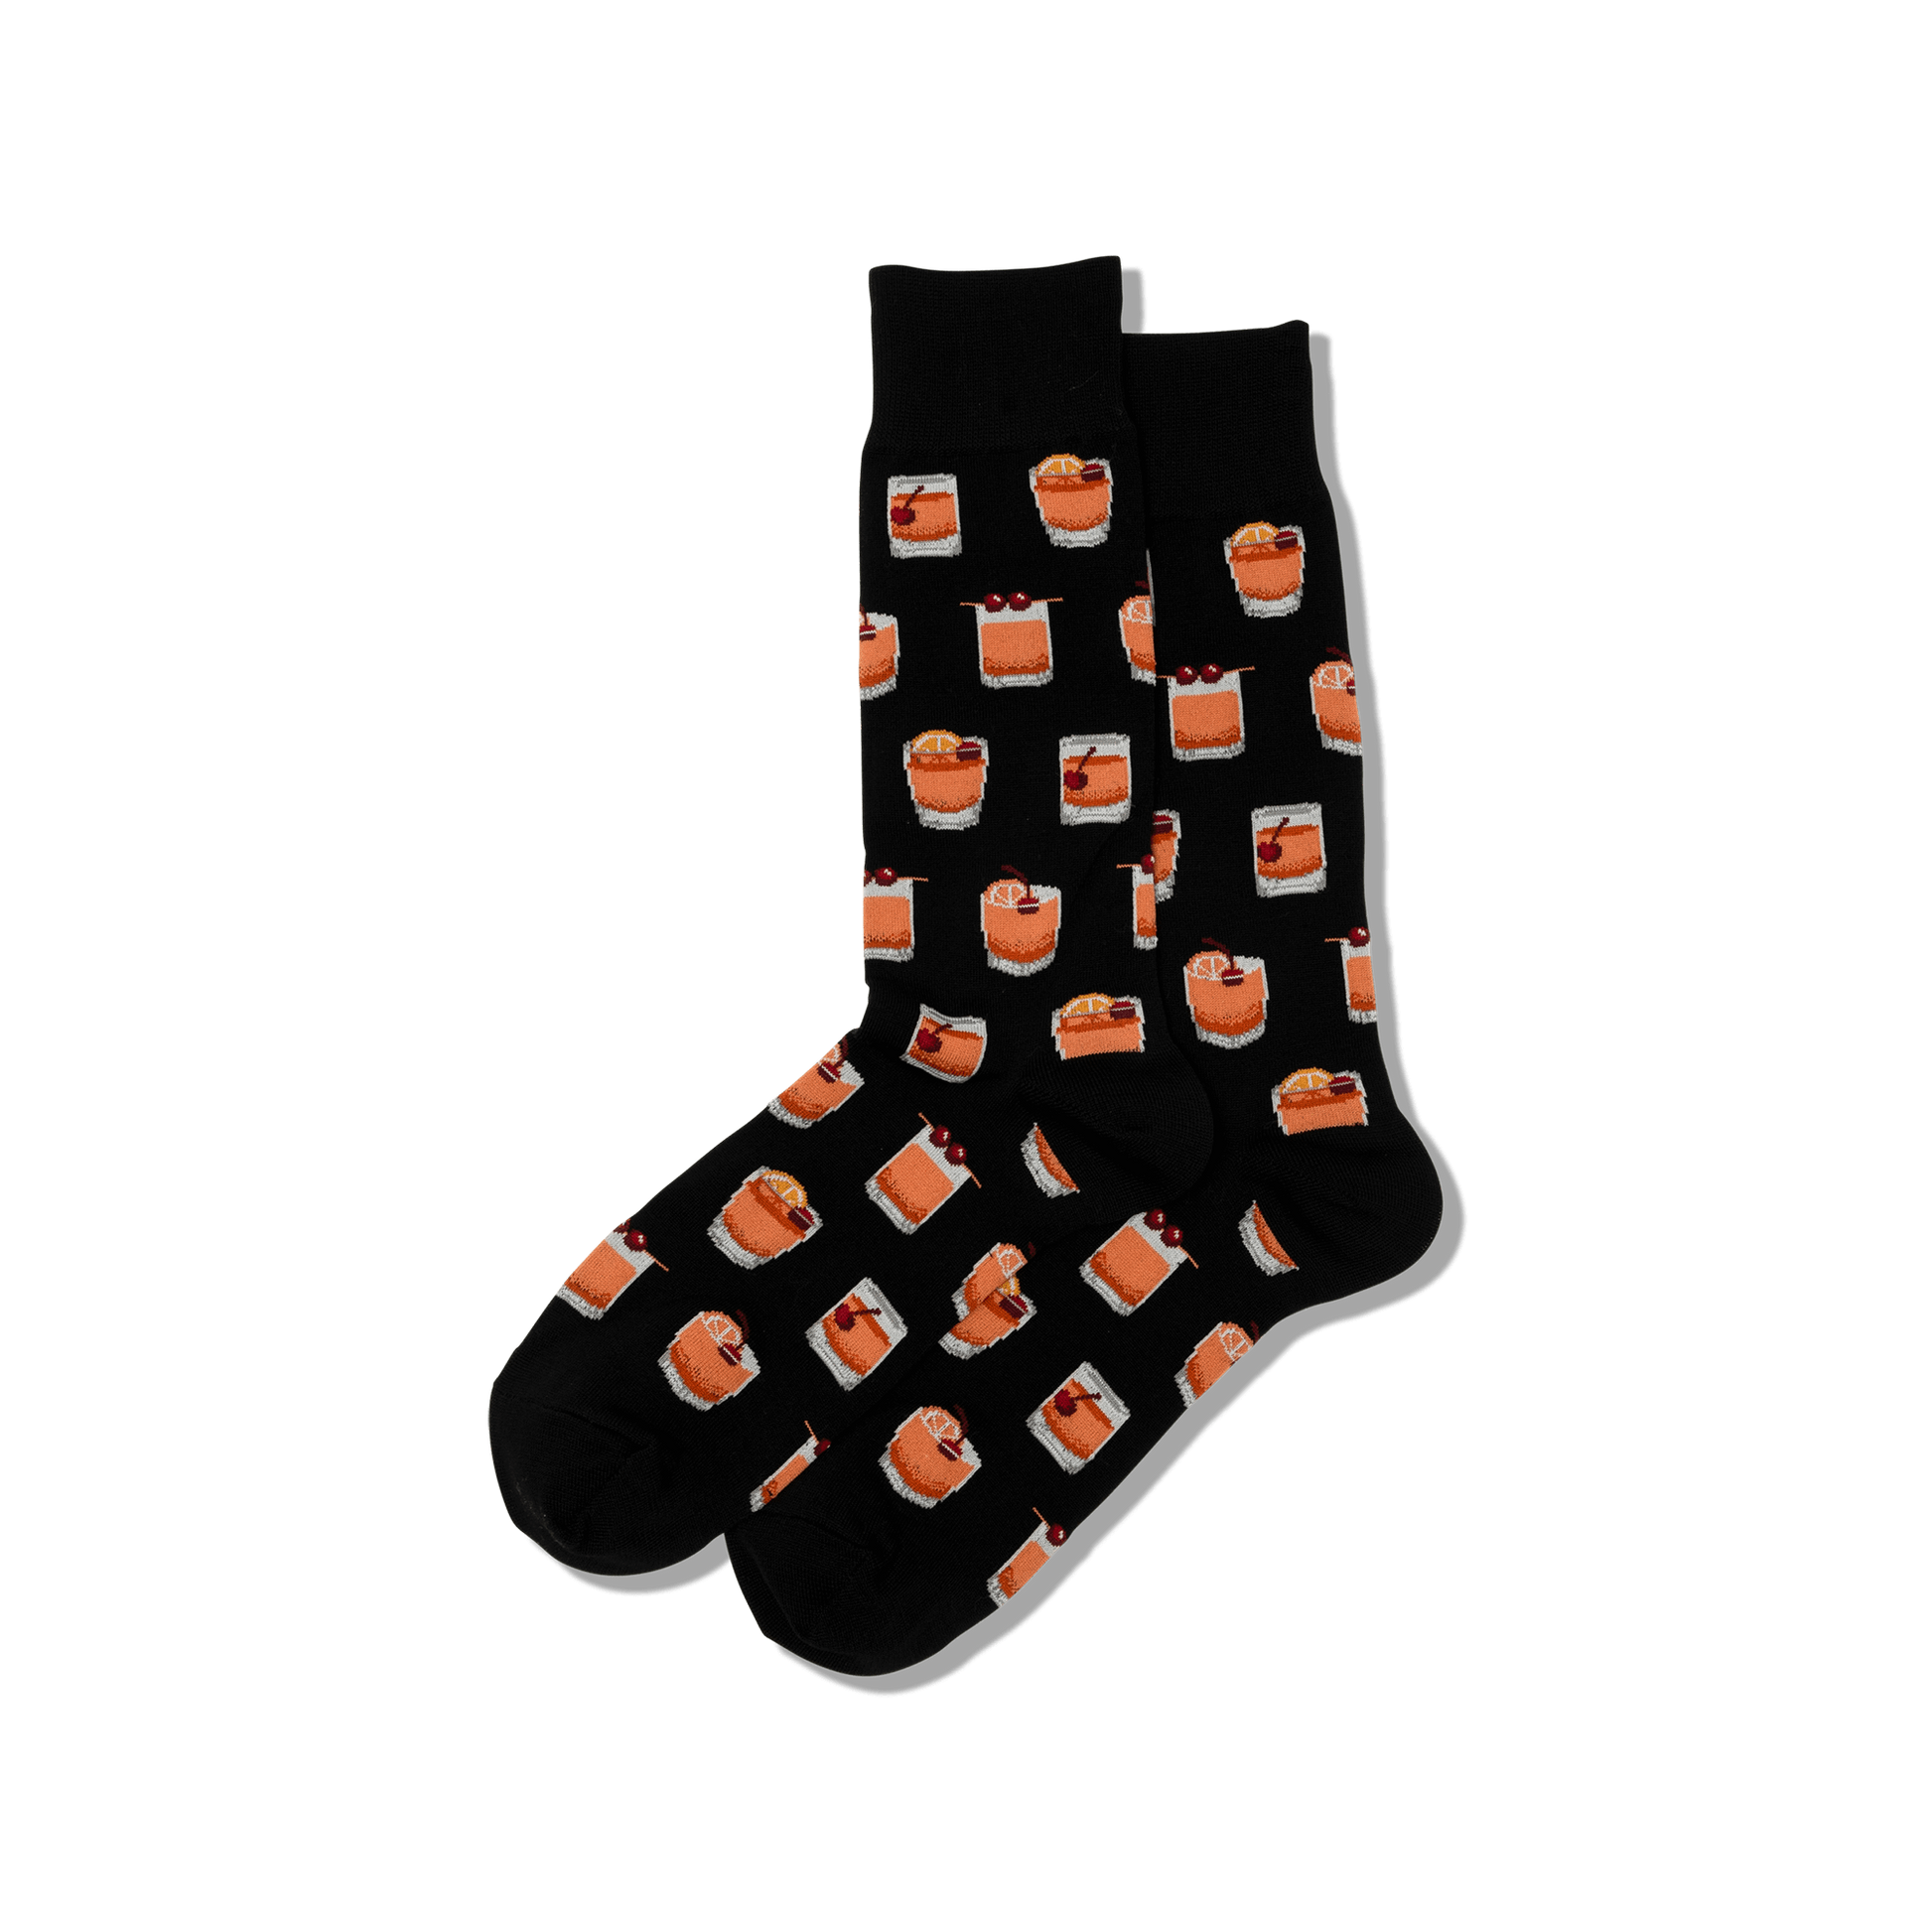 men's old fashioned crew socks are black the drink glasses all over and displayed against a white background